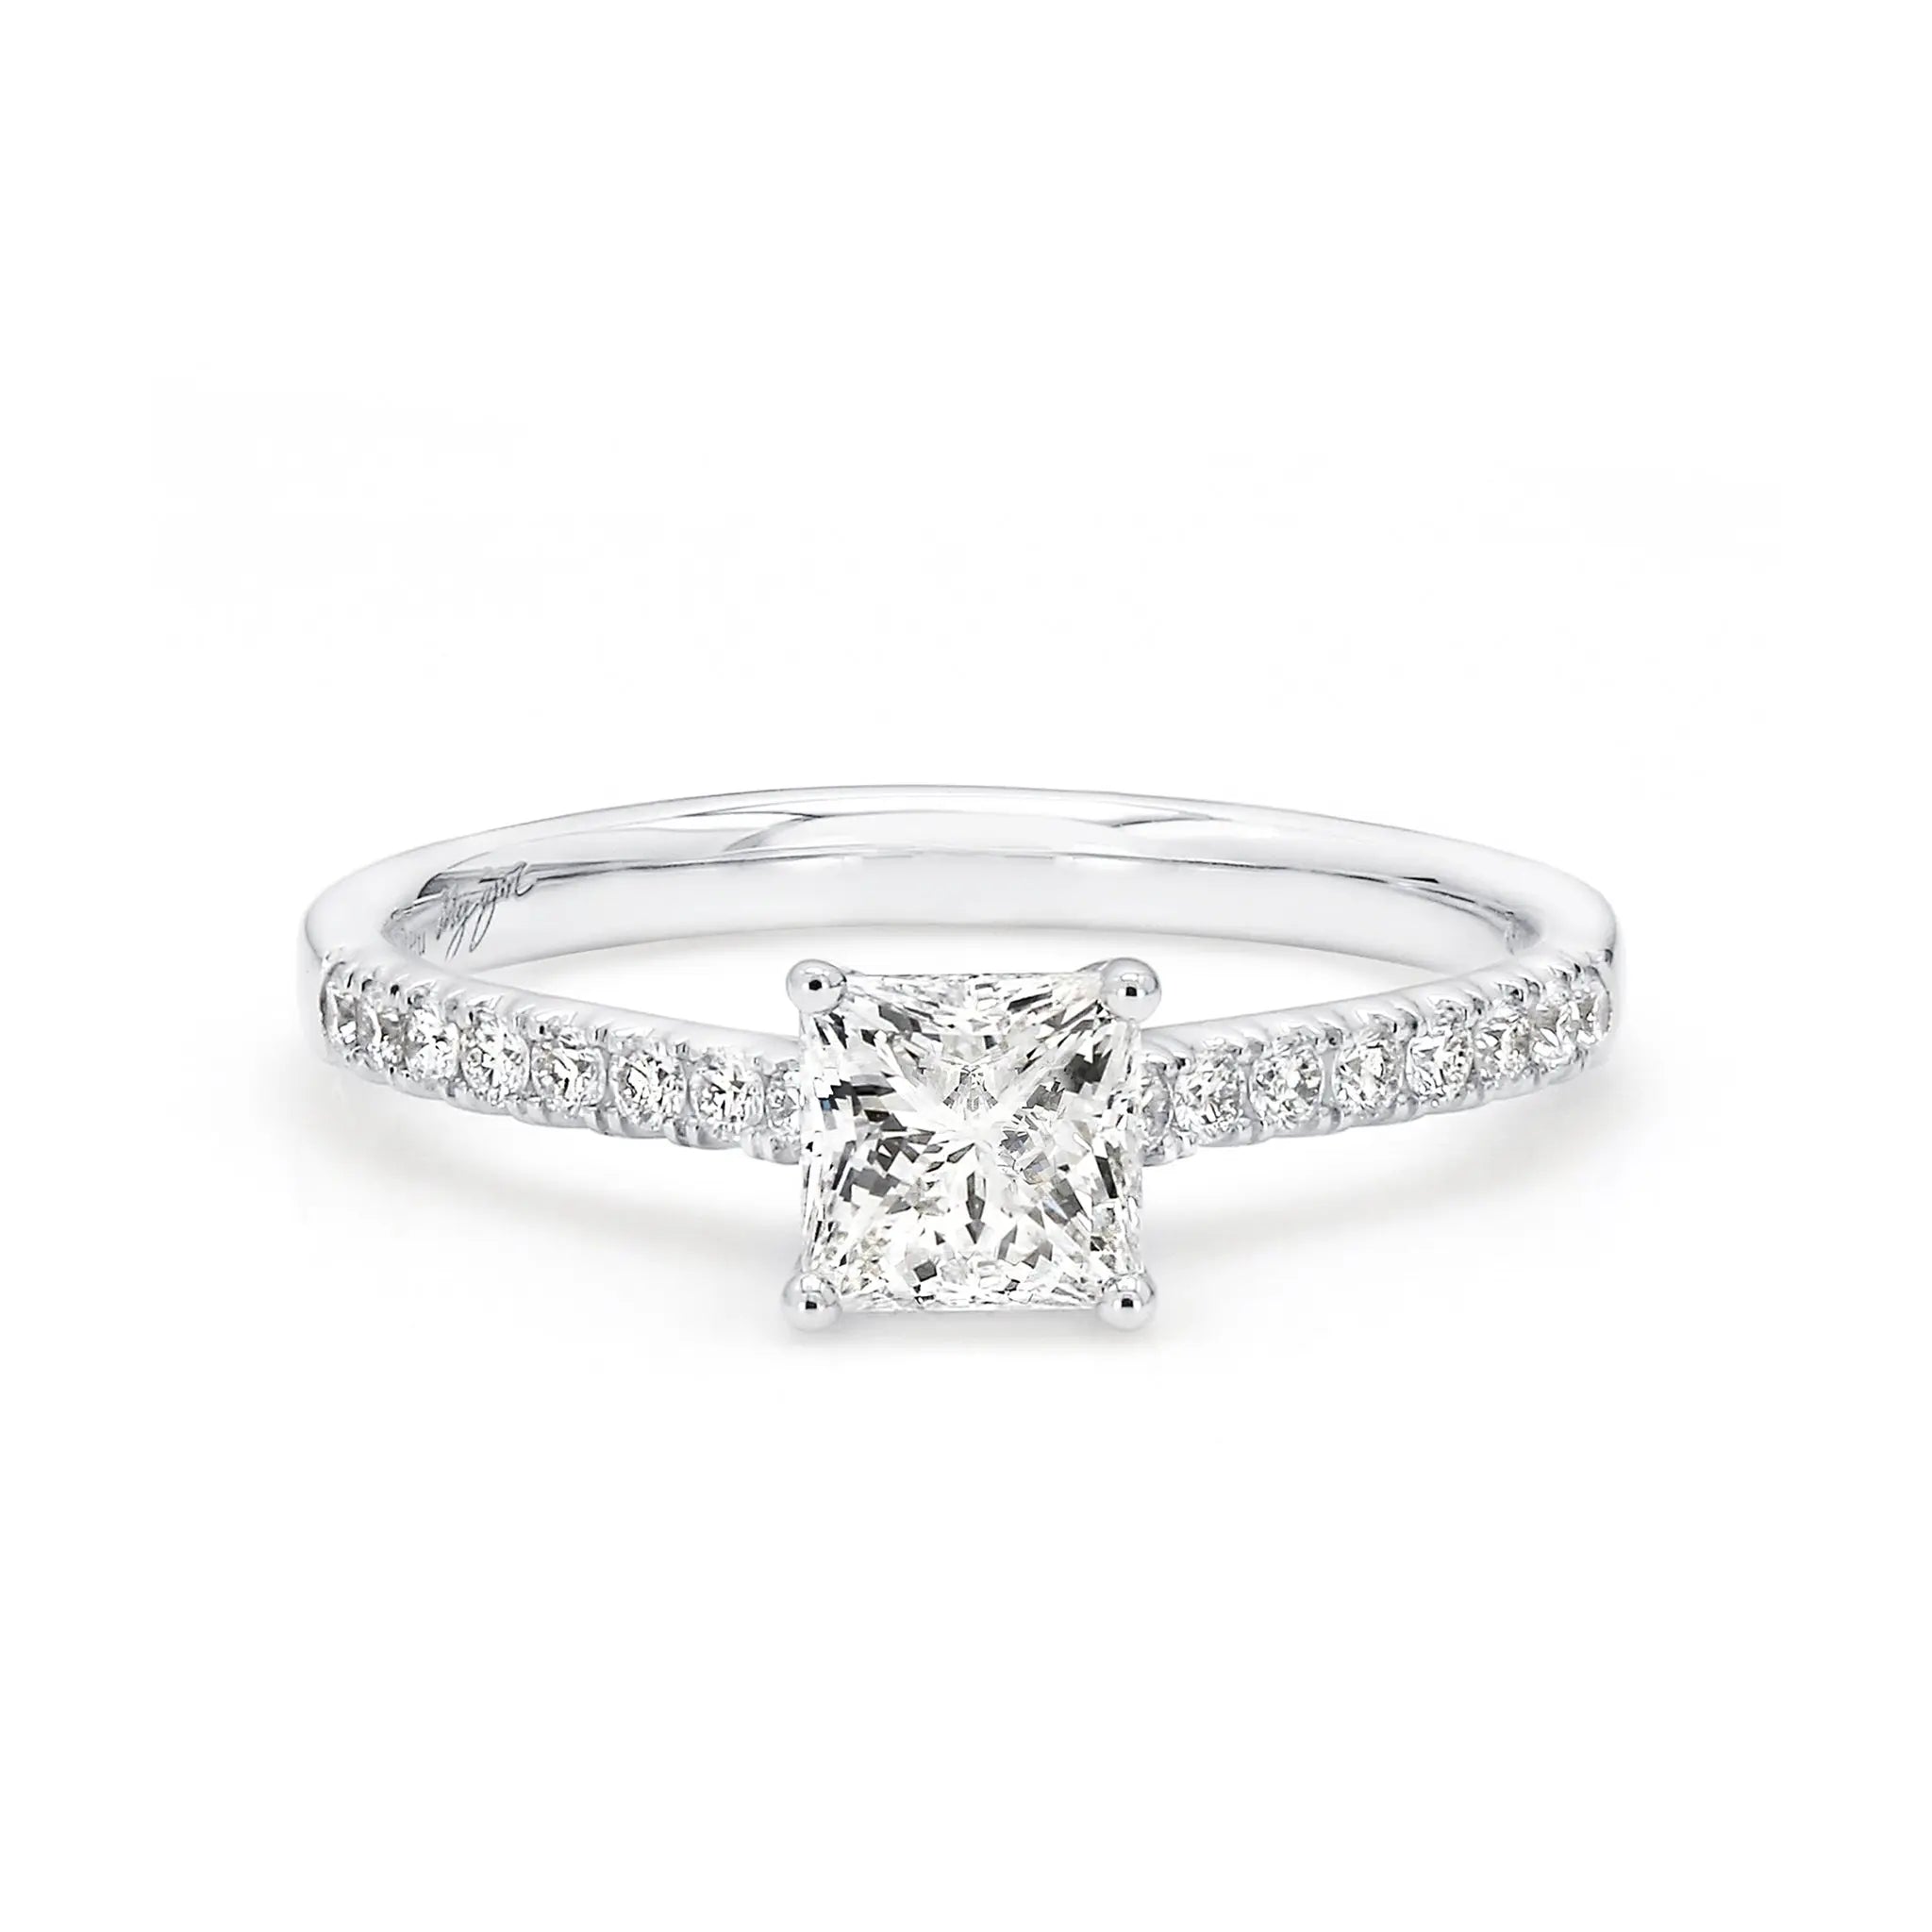 Shimansky - My Girl Microset Diamond Engagement Ring 0.70ct Crafted in 18K White Gold